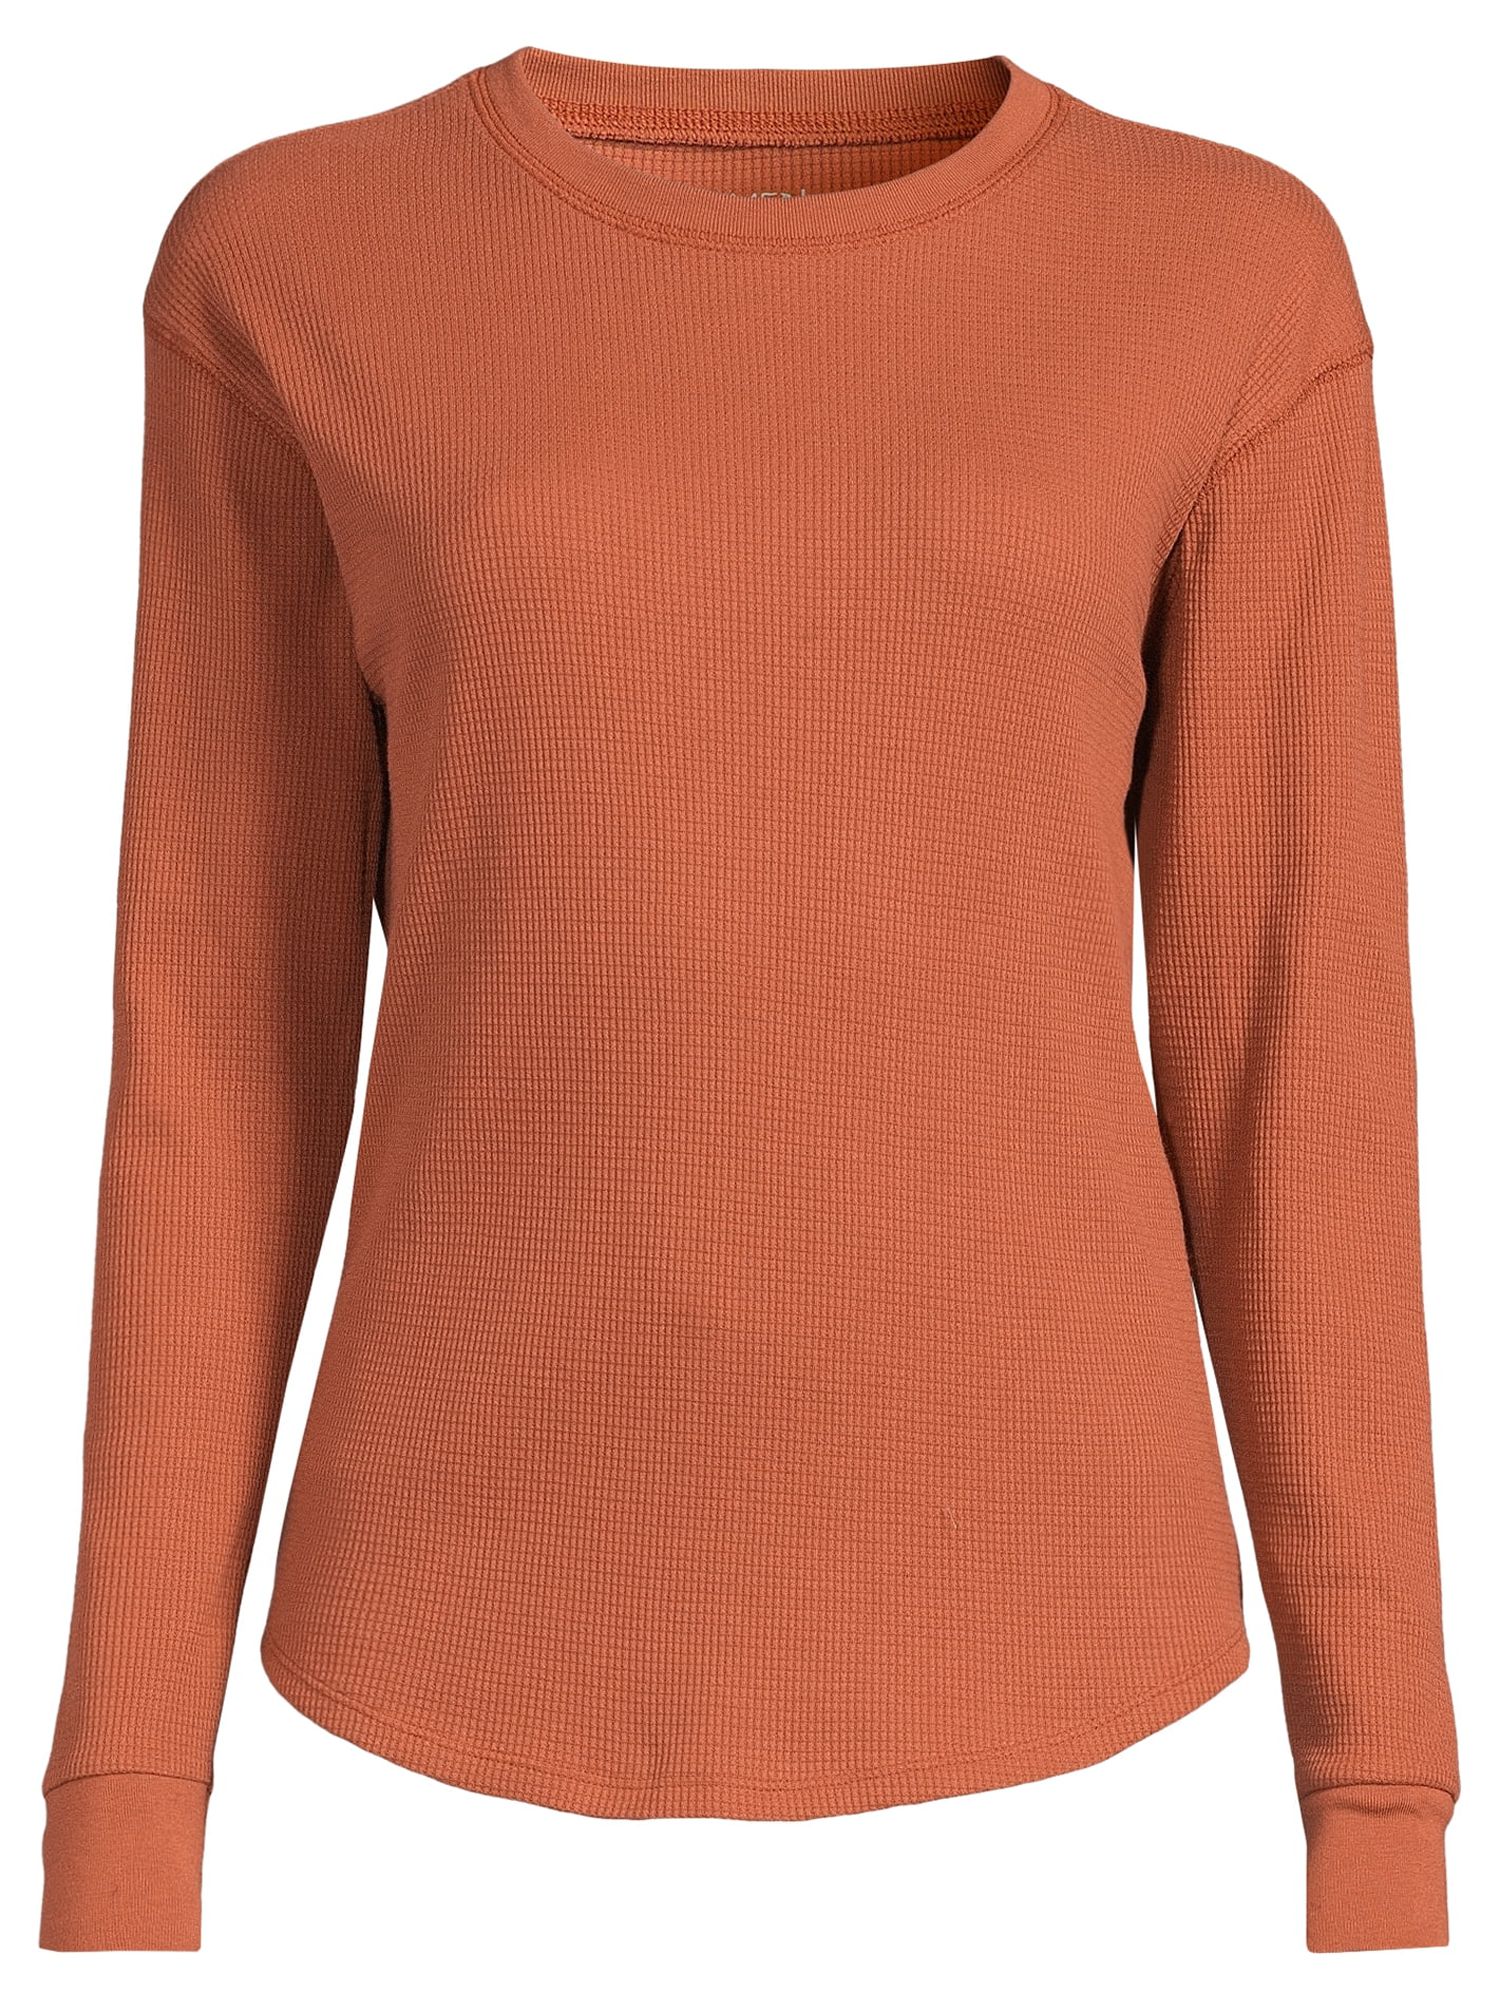 Time and Tru Women's Thermal Top with Long Sleeves - image 2 of 5